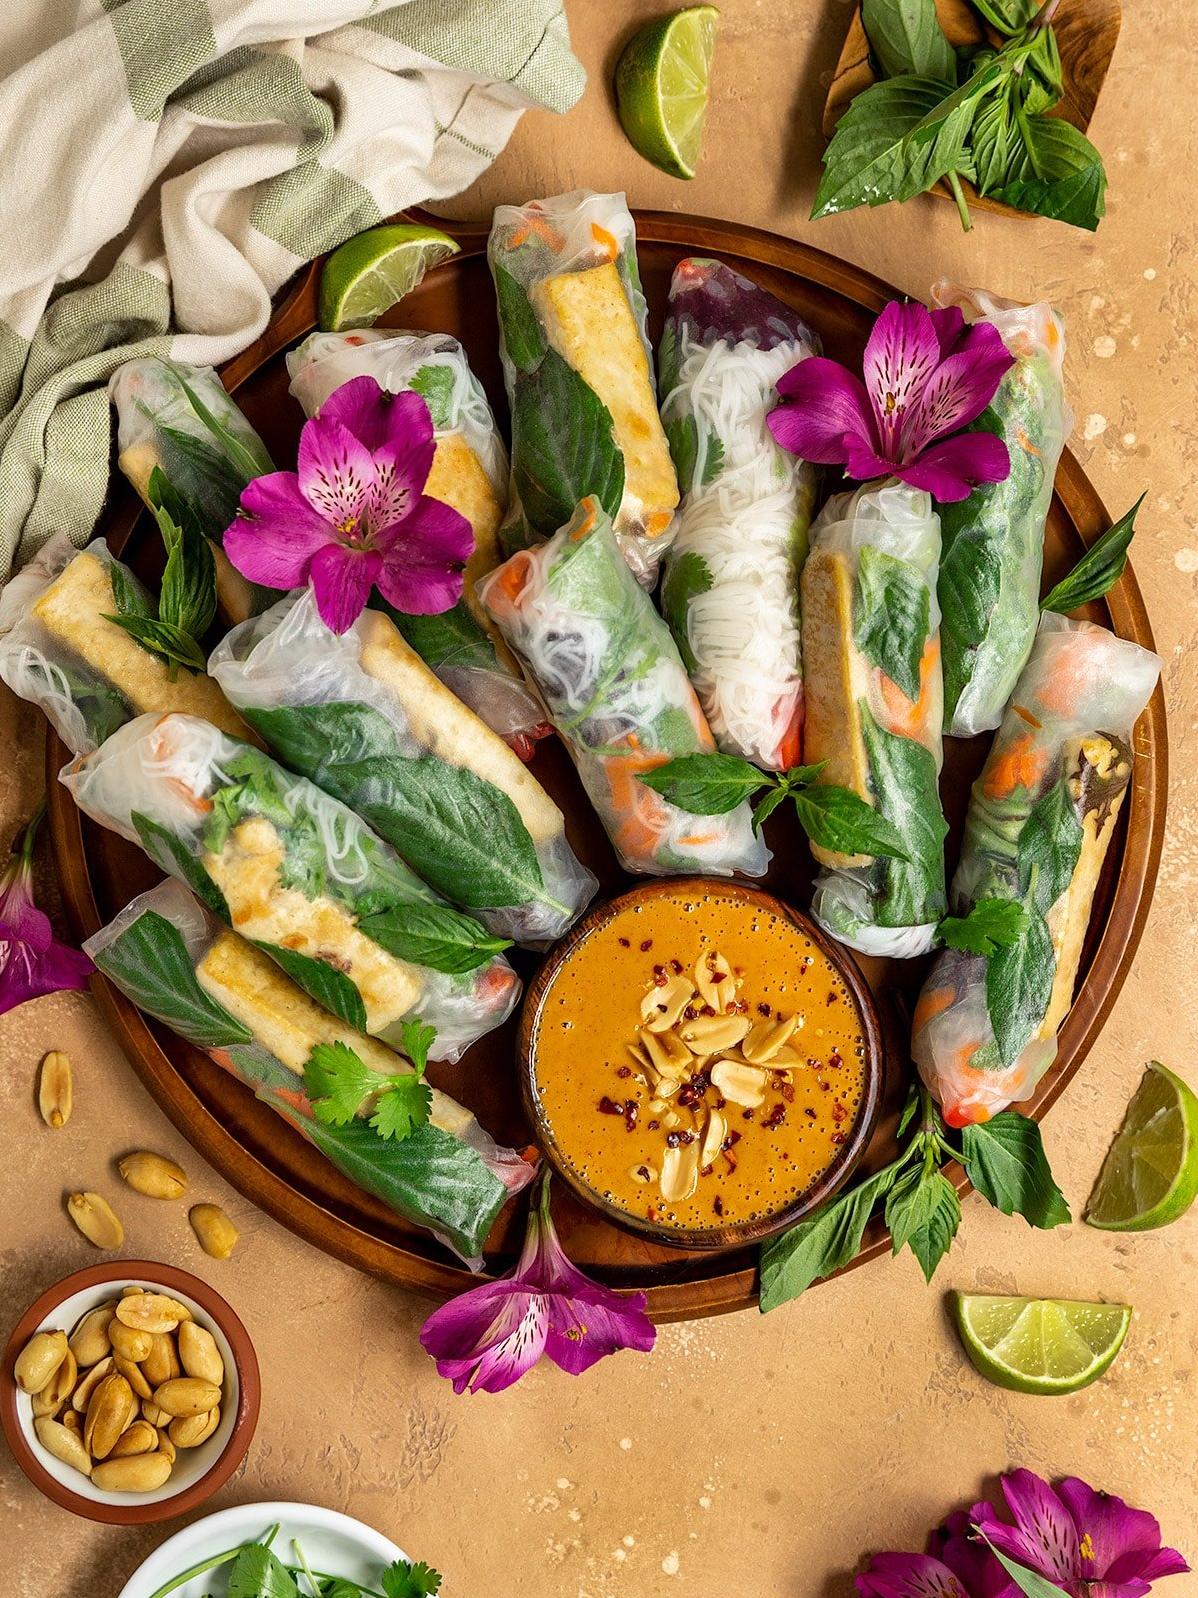 Healthy and Delicious Vietnamese Vegetable Platter Recipe